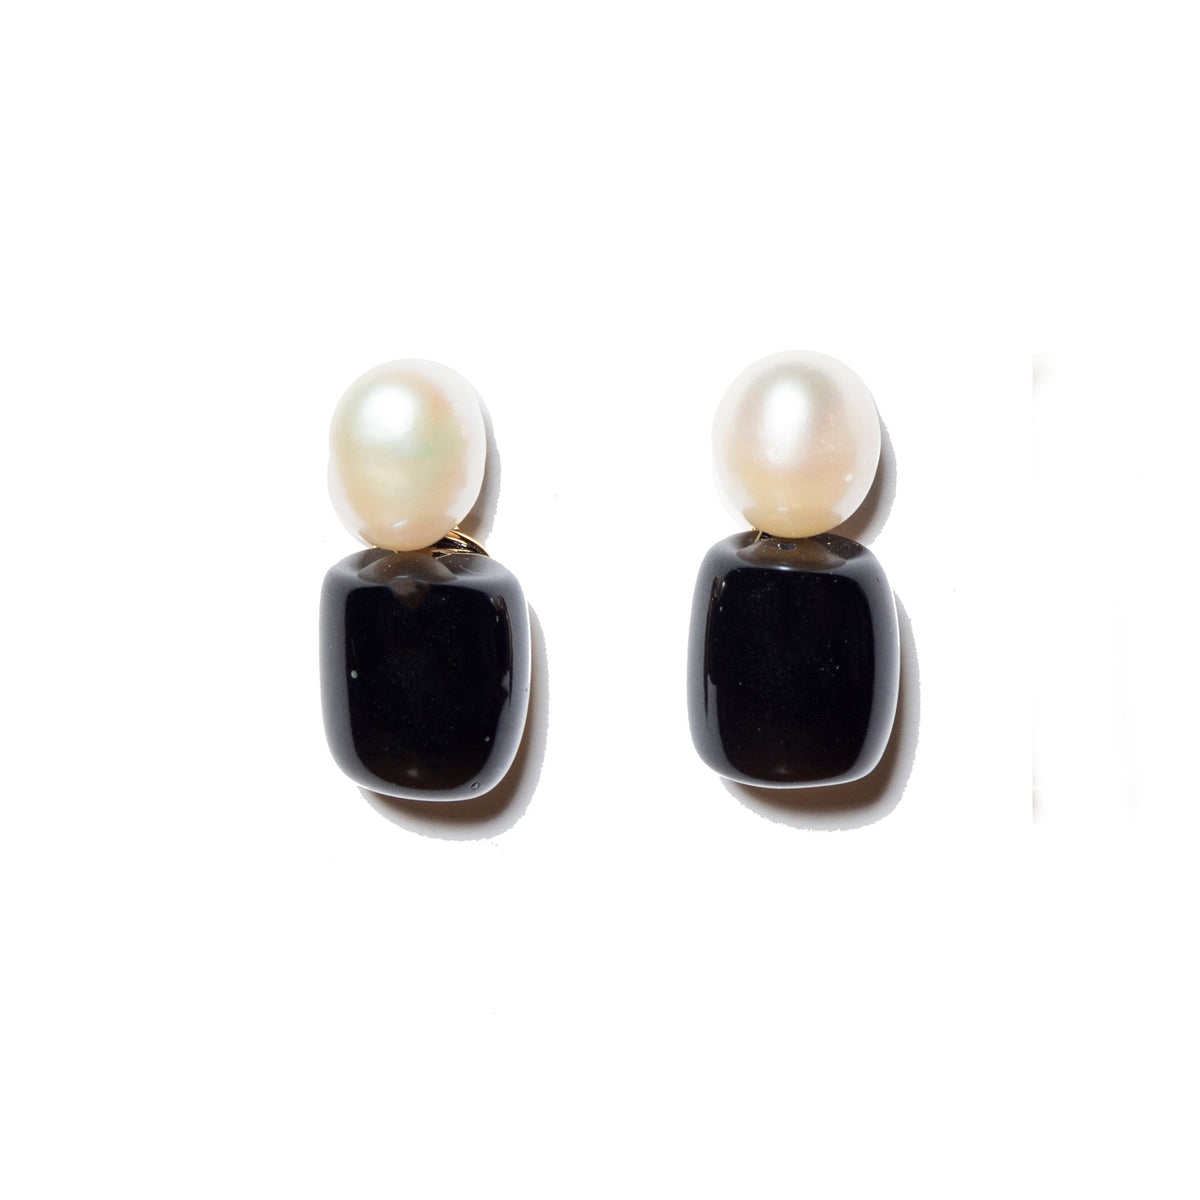 Black Crystal Earrings with Swarovski and sterling silver